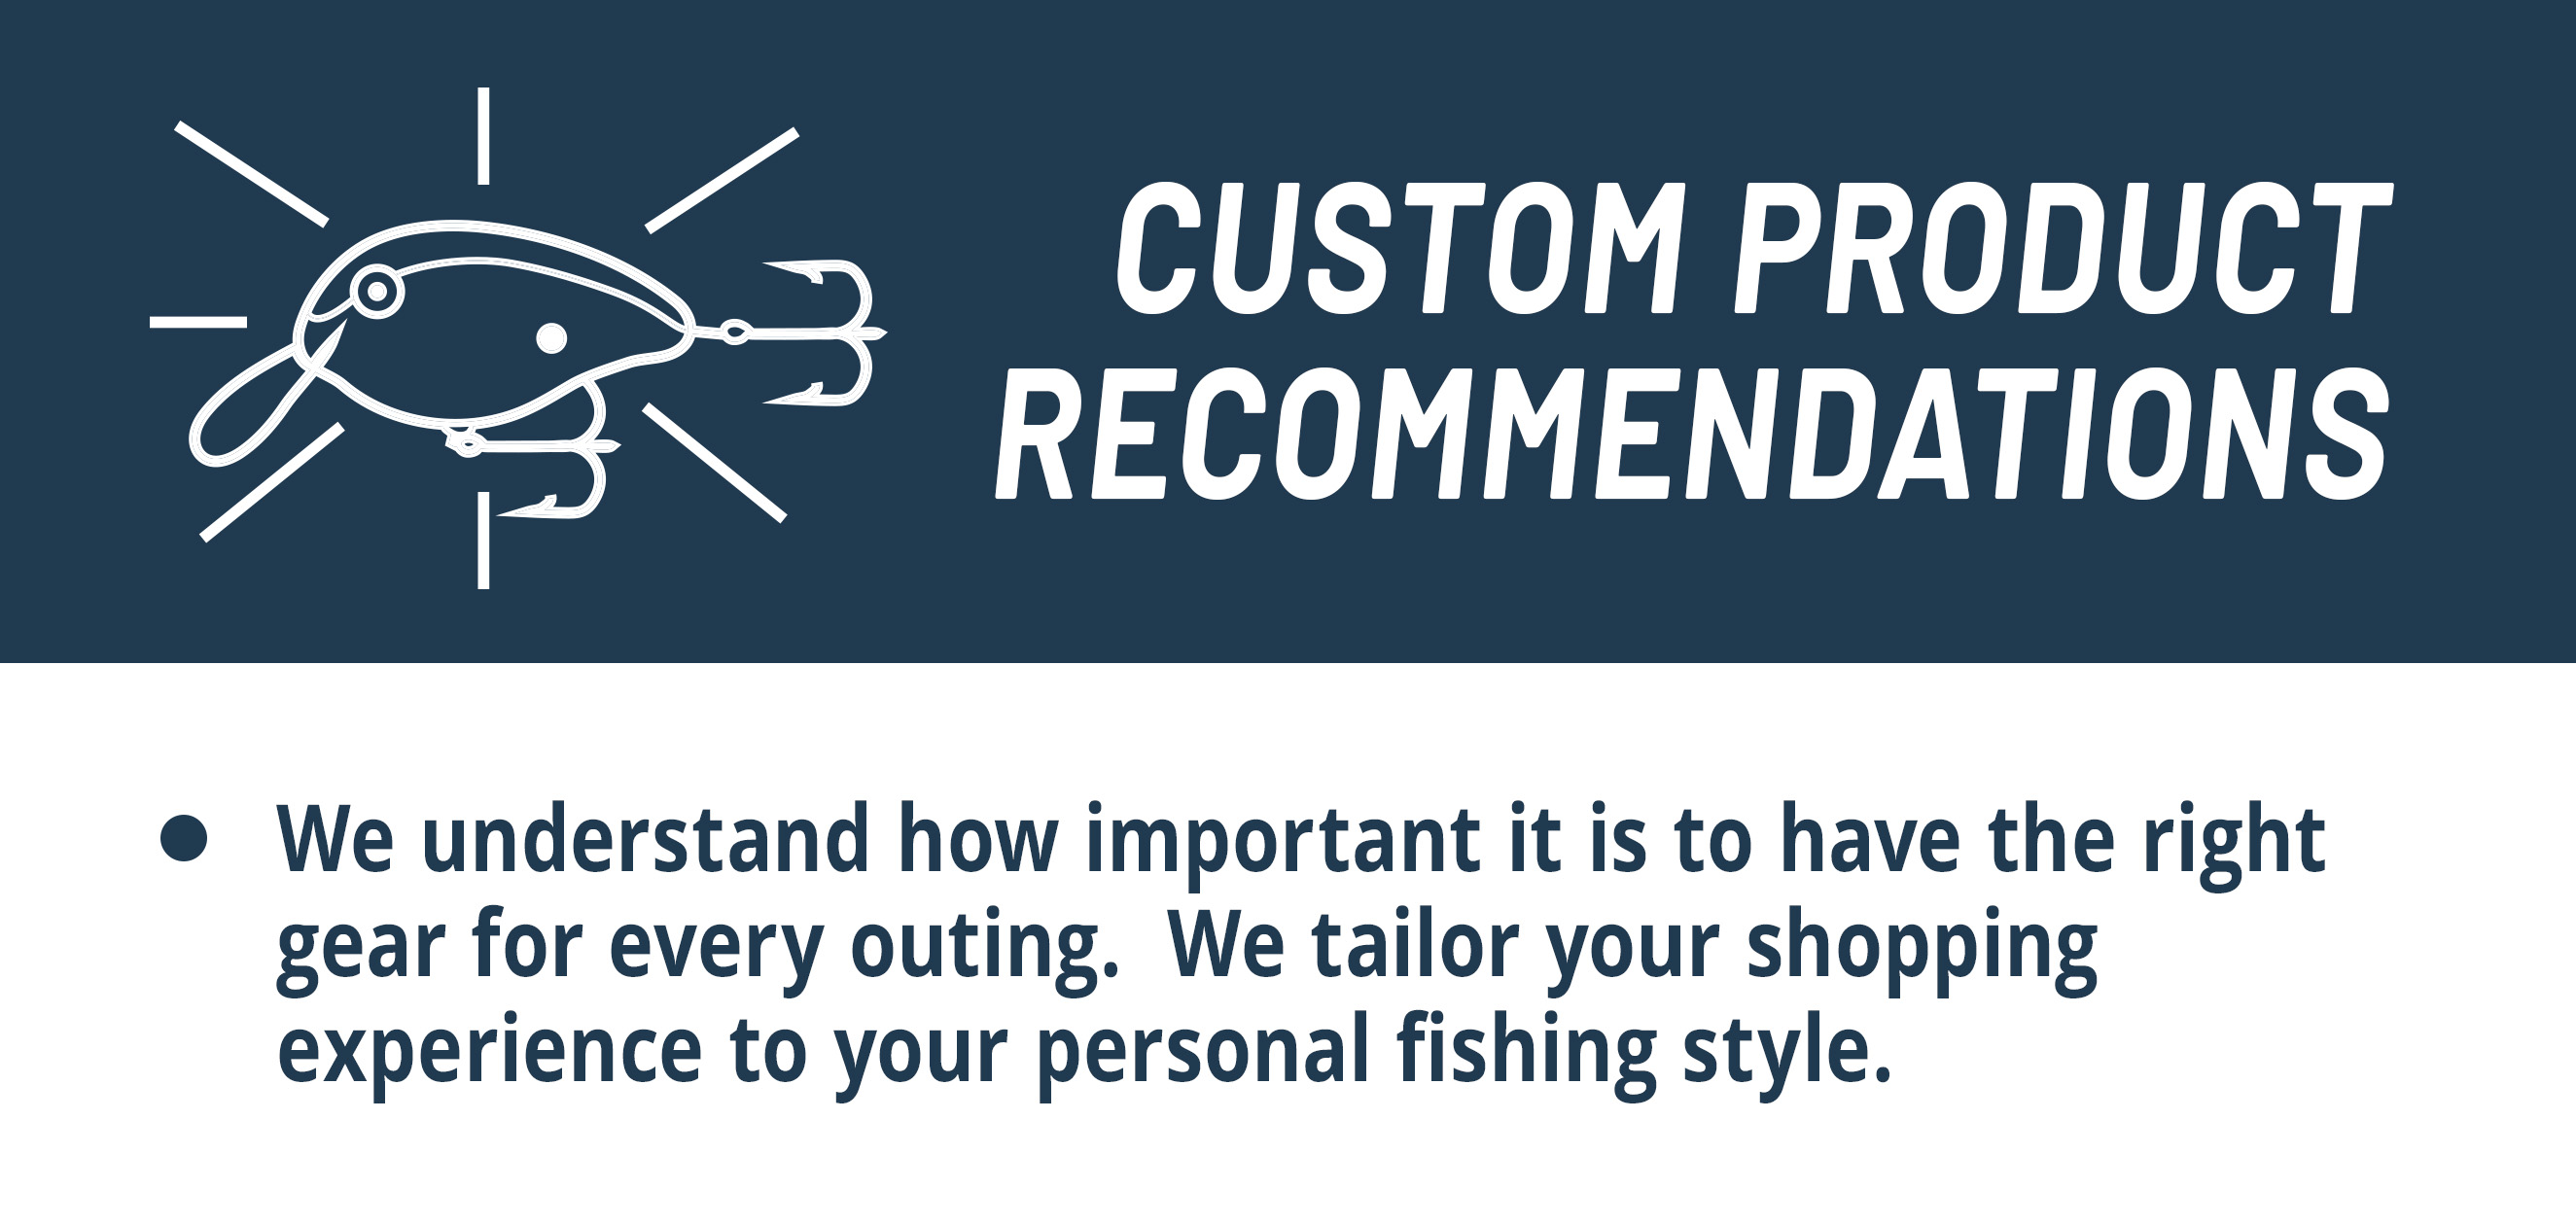 Custom Product Recommendations  We understand how important it is to have the right gear for every outing.  We tailor your shopping experience to your personal fishing style. 